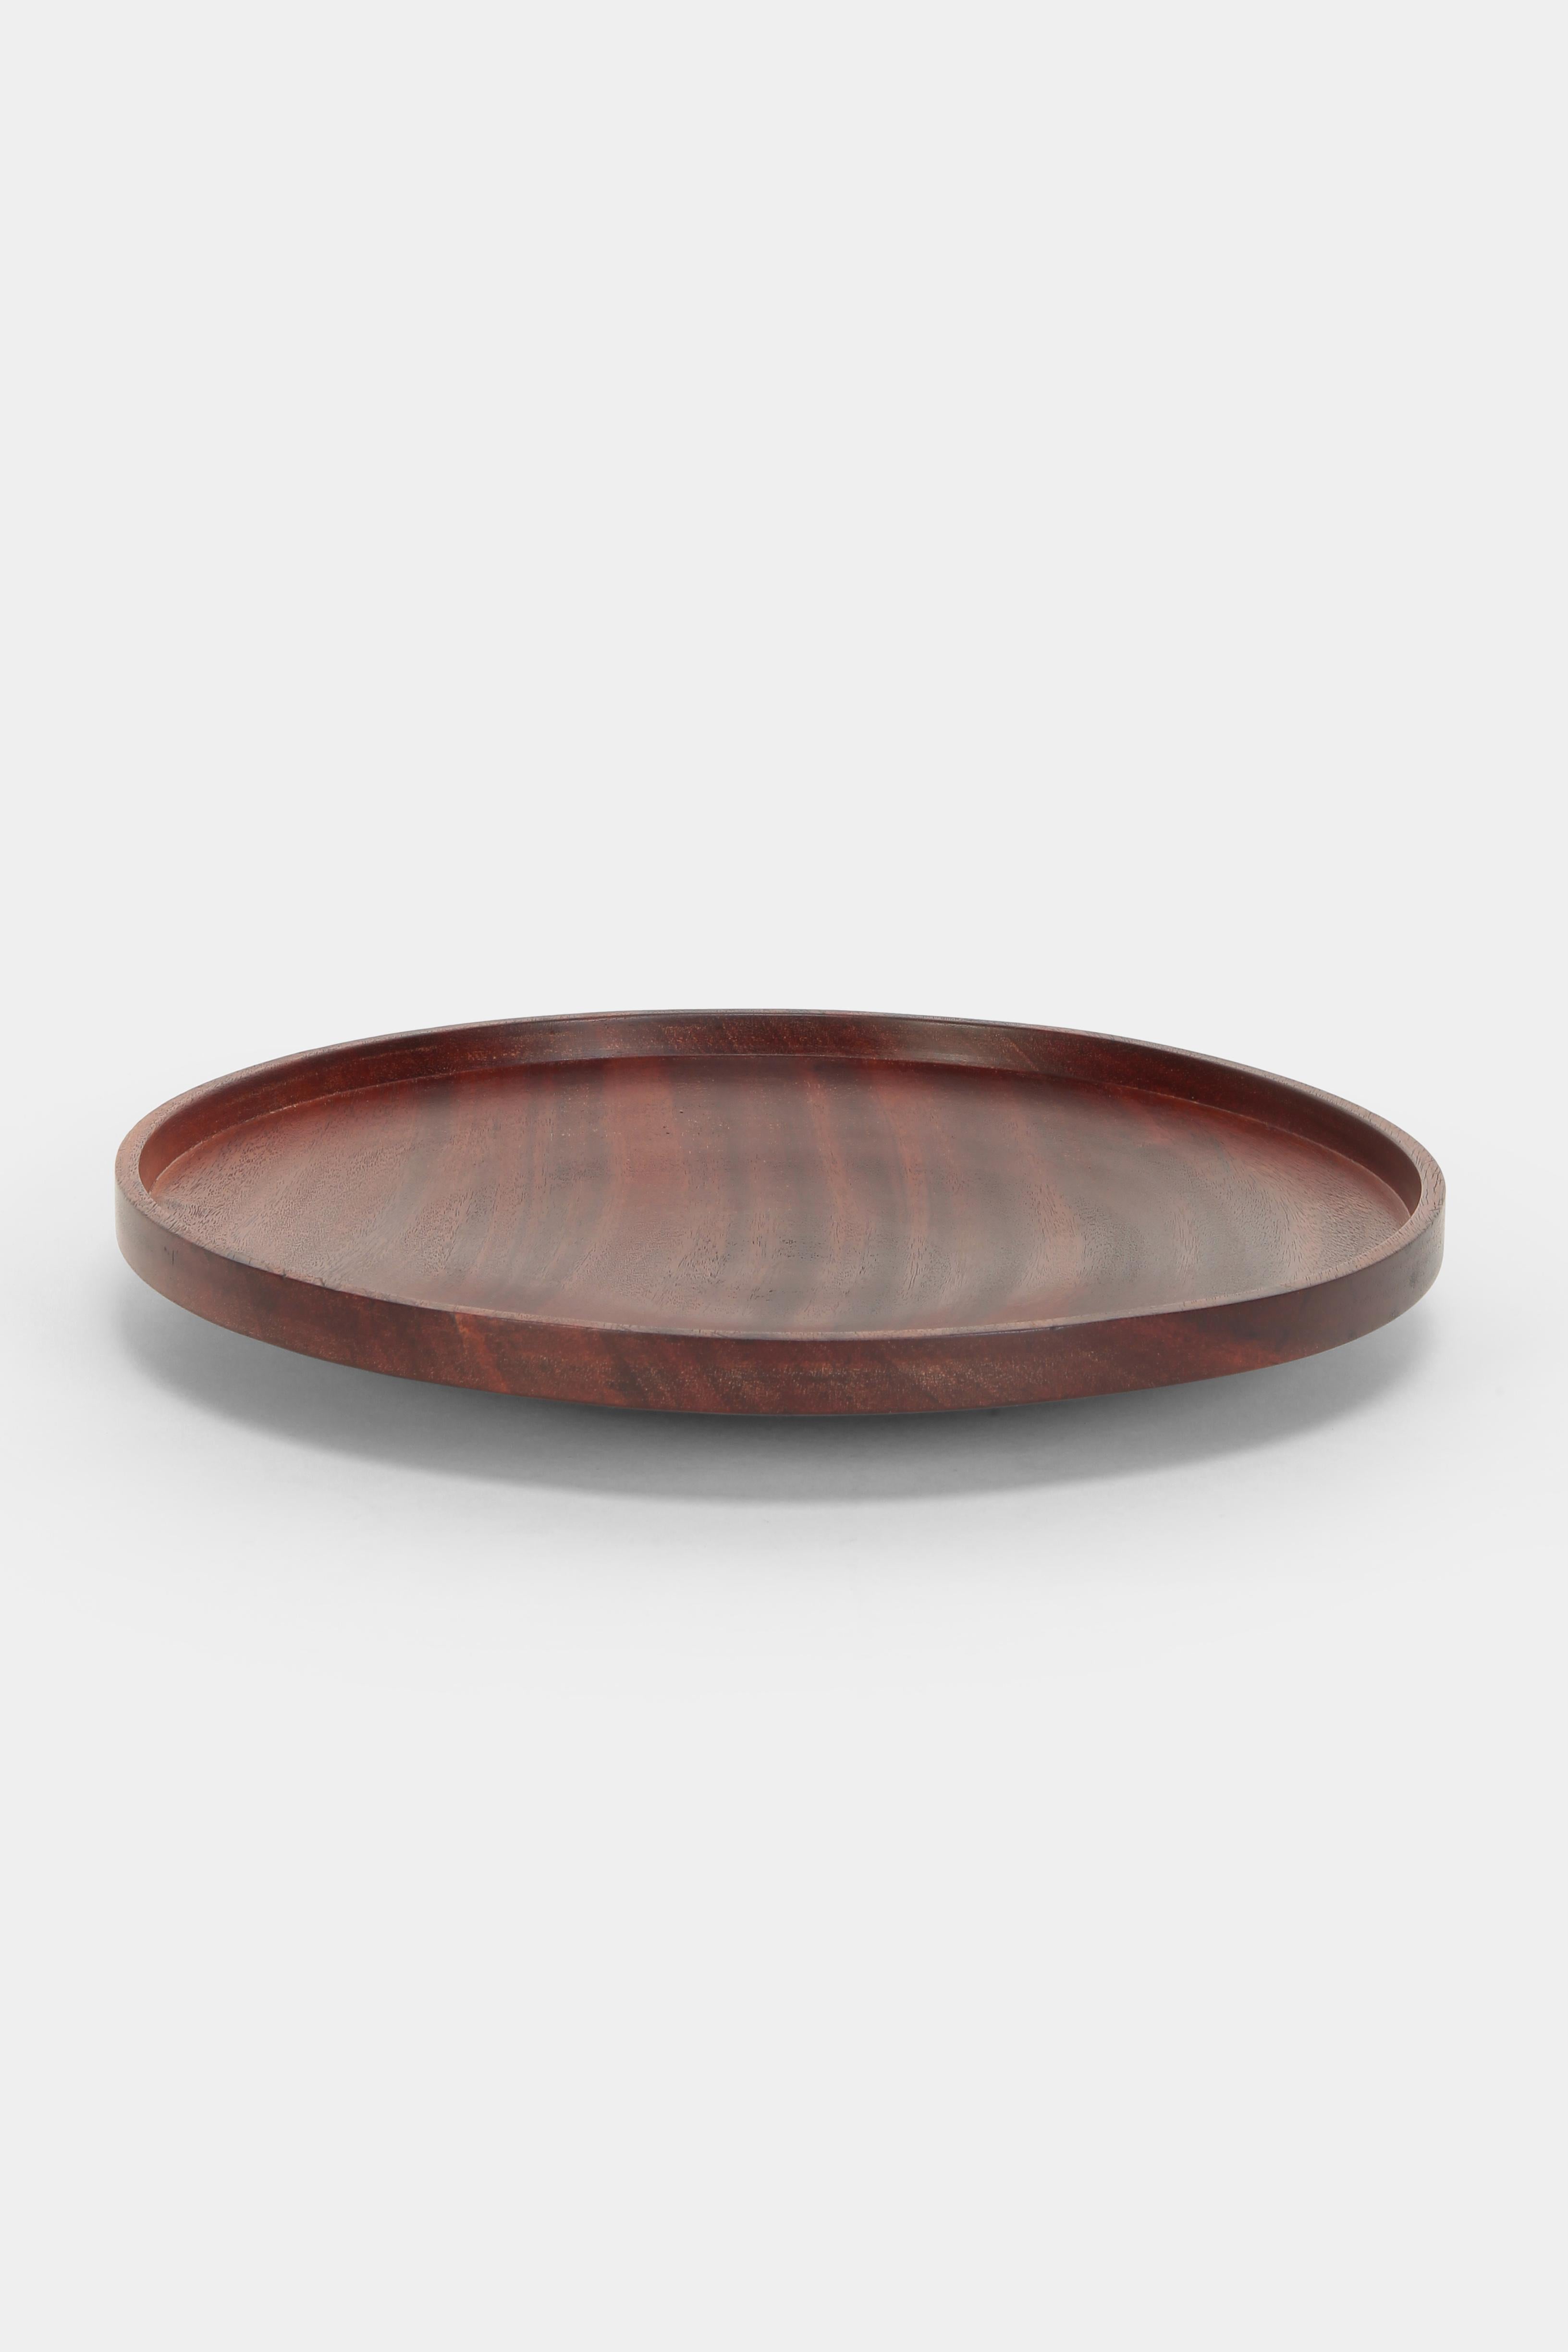 Very elegant hand-turned teak bowl in one piece. Made in Denmark in the 1960. Unknown manufacturer, probably made to order. Very nice object. Classic midcentury piece.